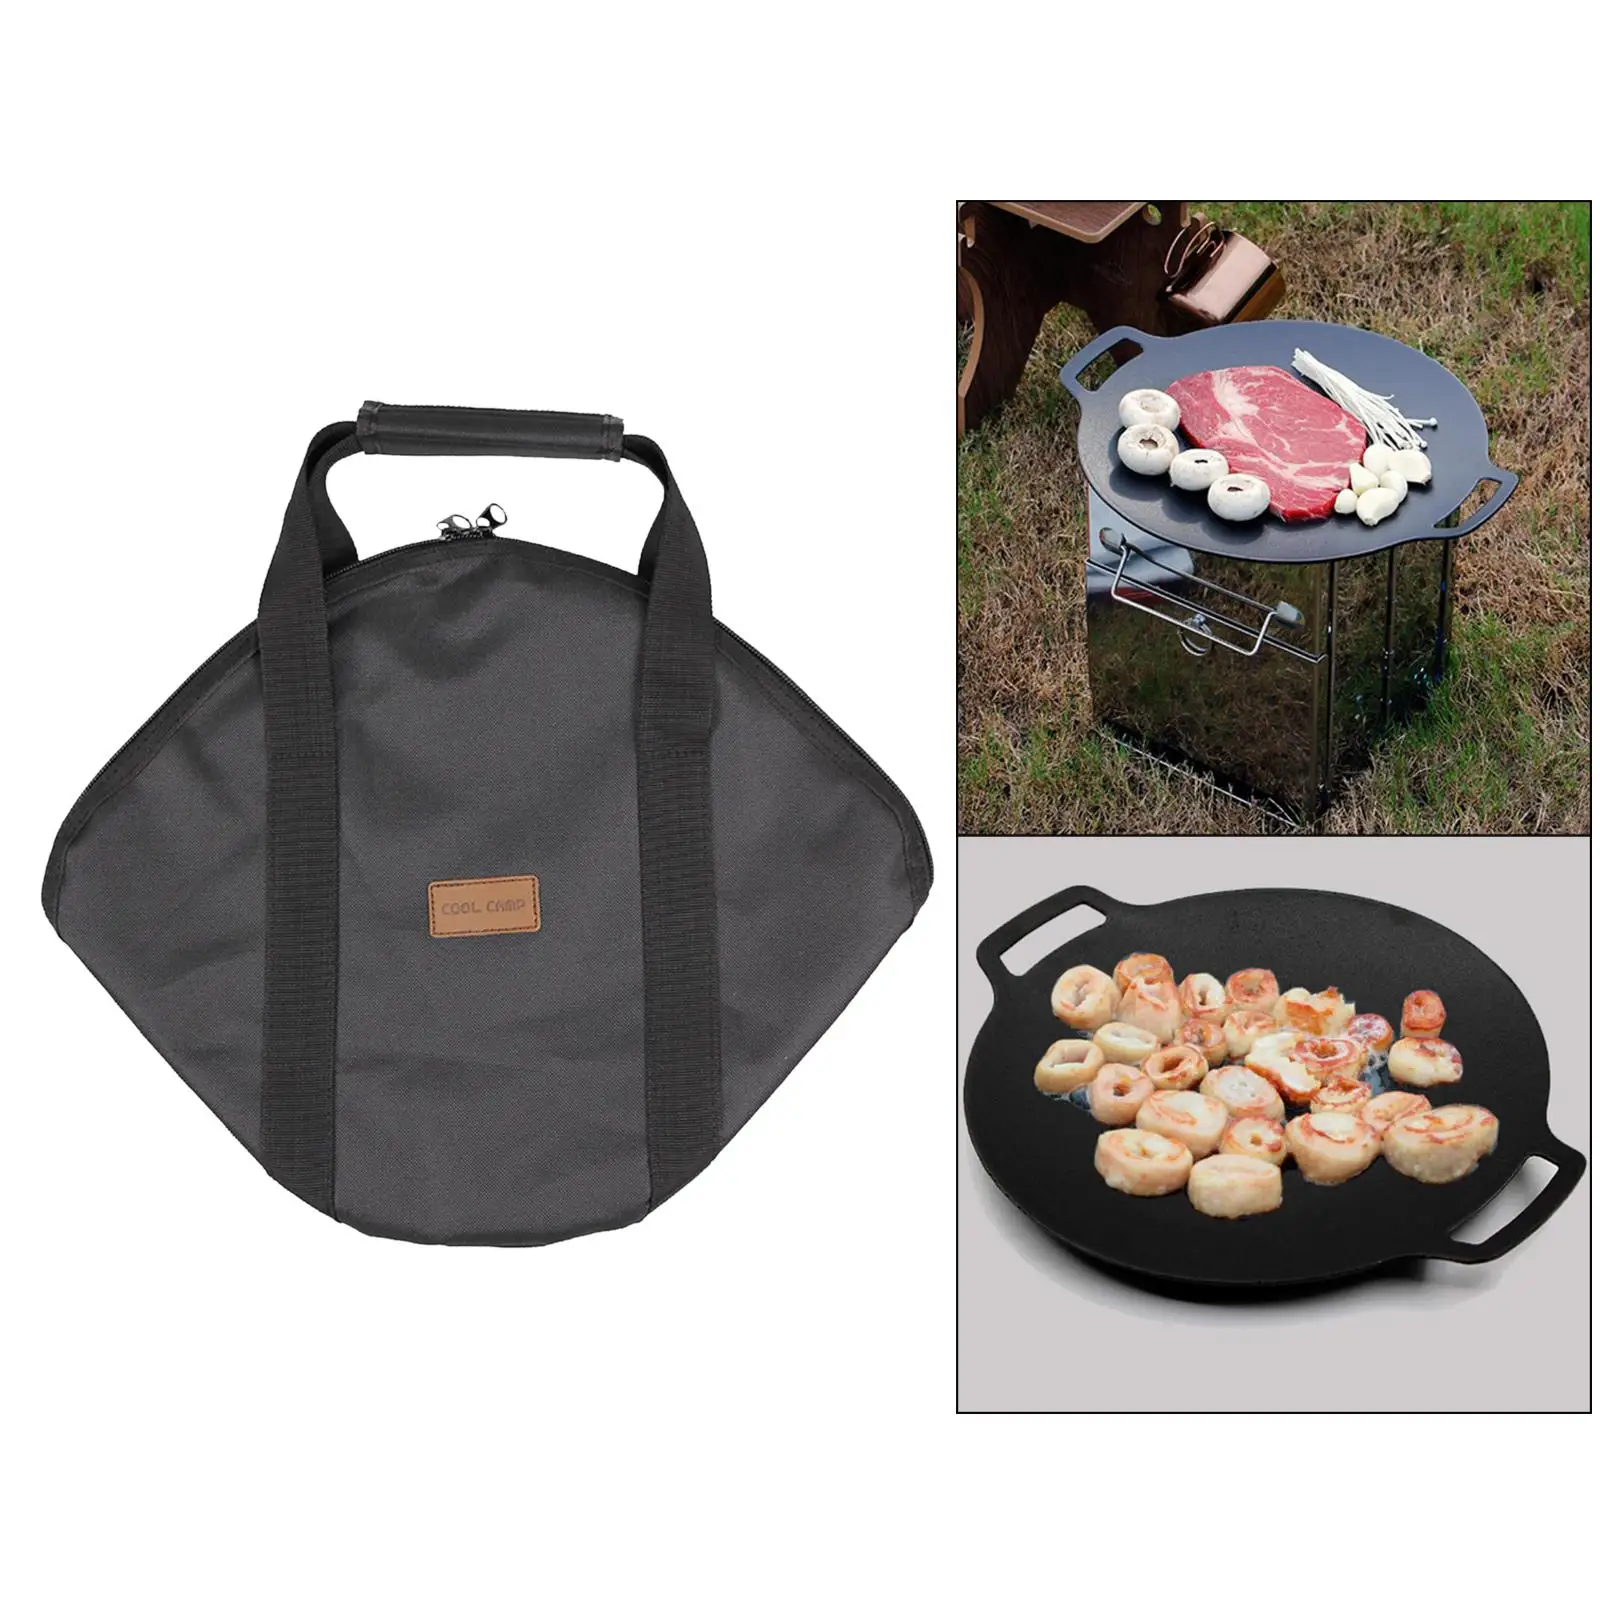 Stovetop Barbecue Grill Pan Bag Barbecue Plate Cooking Meat Frying Pan